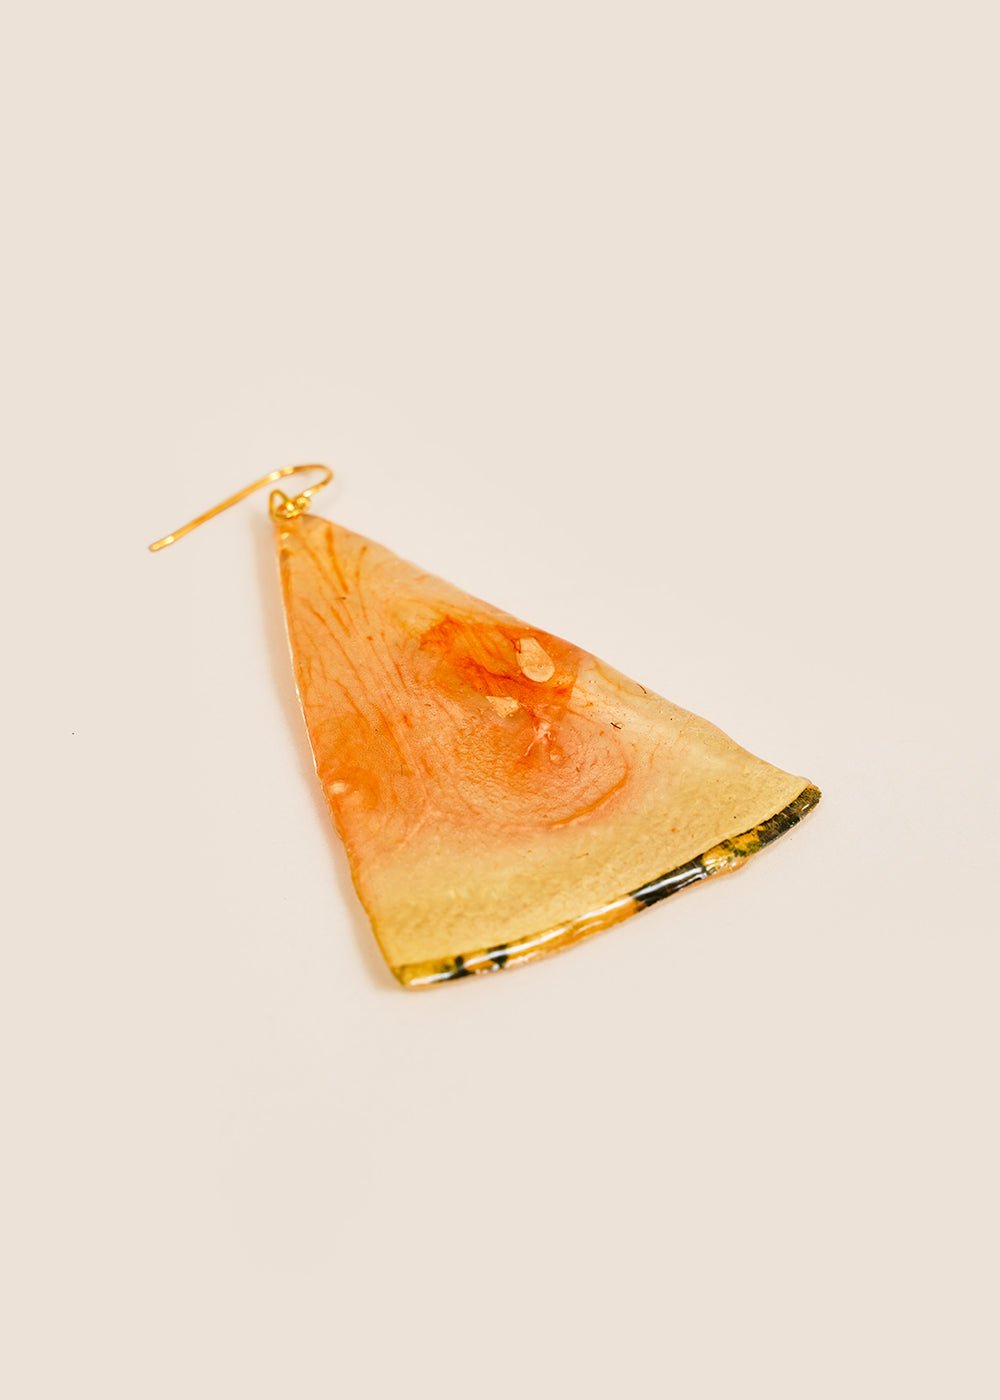 Dauphinette Watermelon Slice Earring - New Classics Studios Sustainable Ethical Fashion Canada